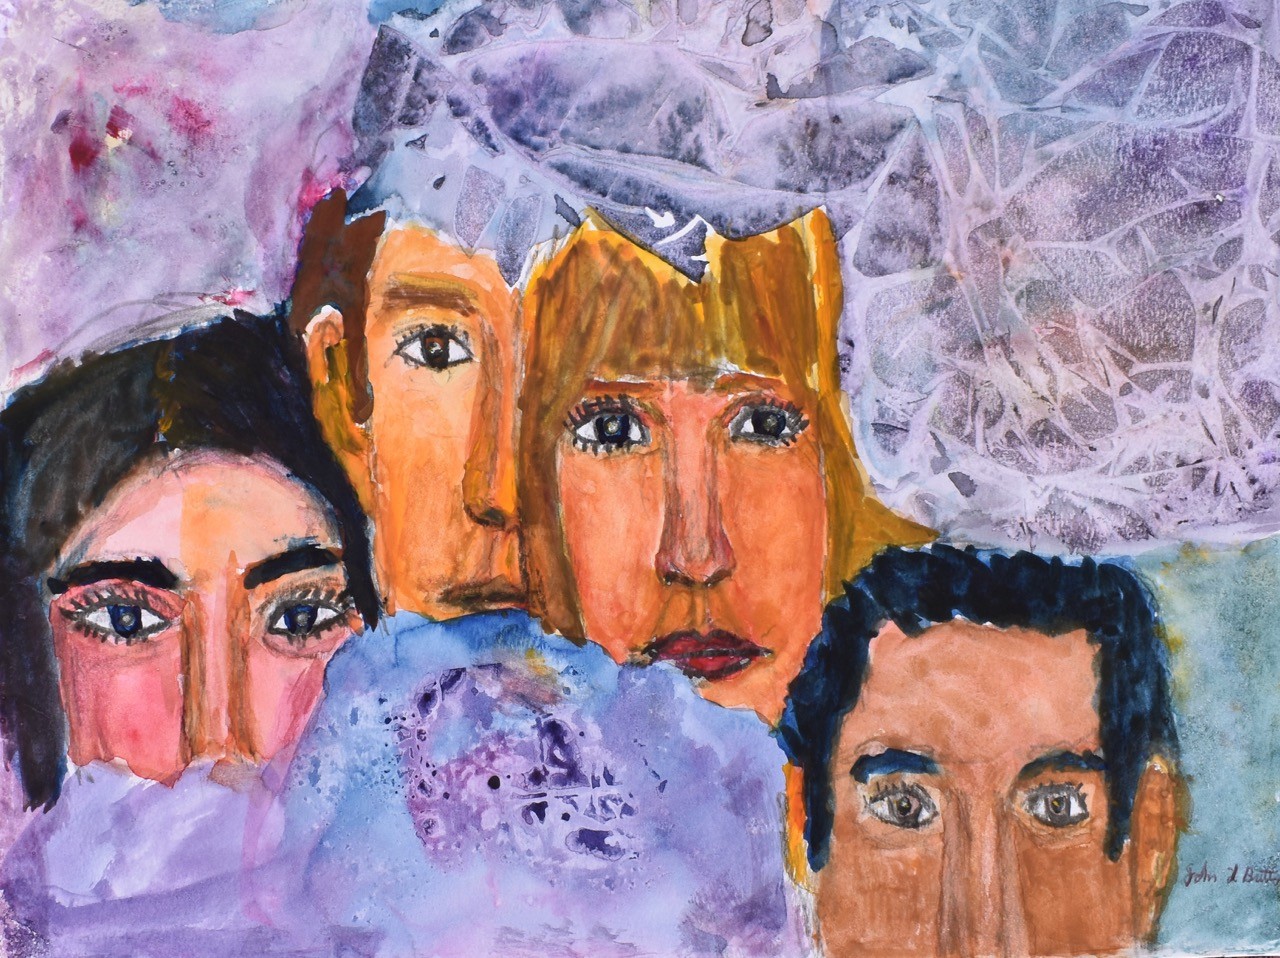 The painting shows parts of 4 faces; the faces are overlapping and appear to be two men and two women, with different complexions and hair colors. They are shown against a light purple watercolor background with lines, which looks almost like a spider web or clouds.